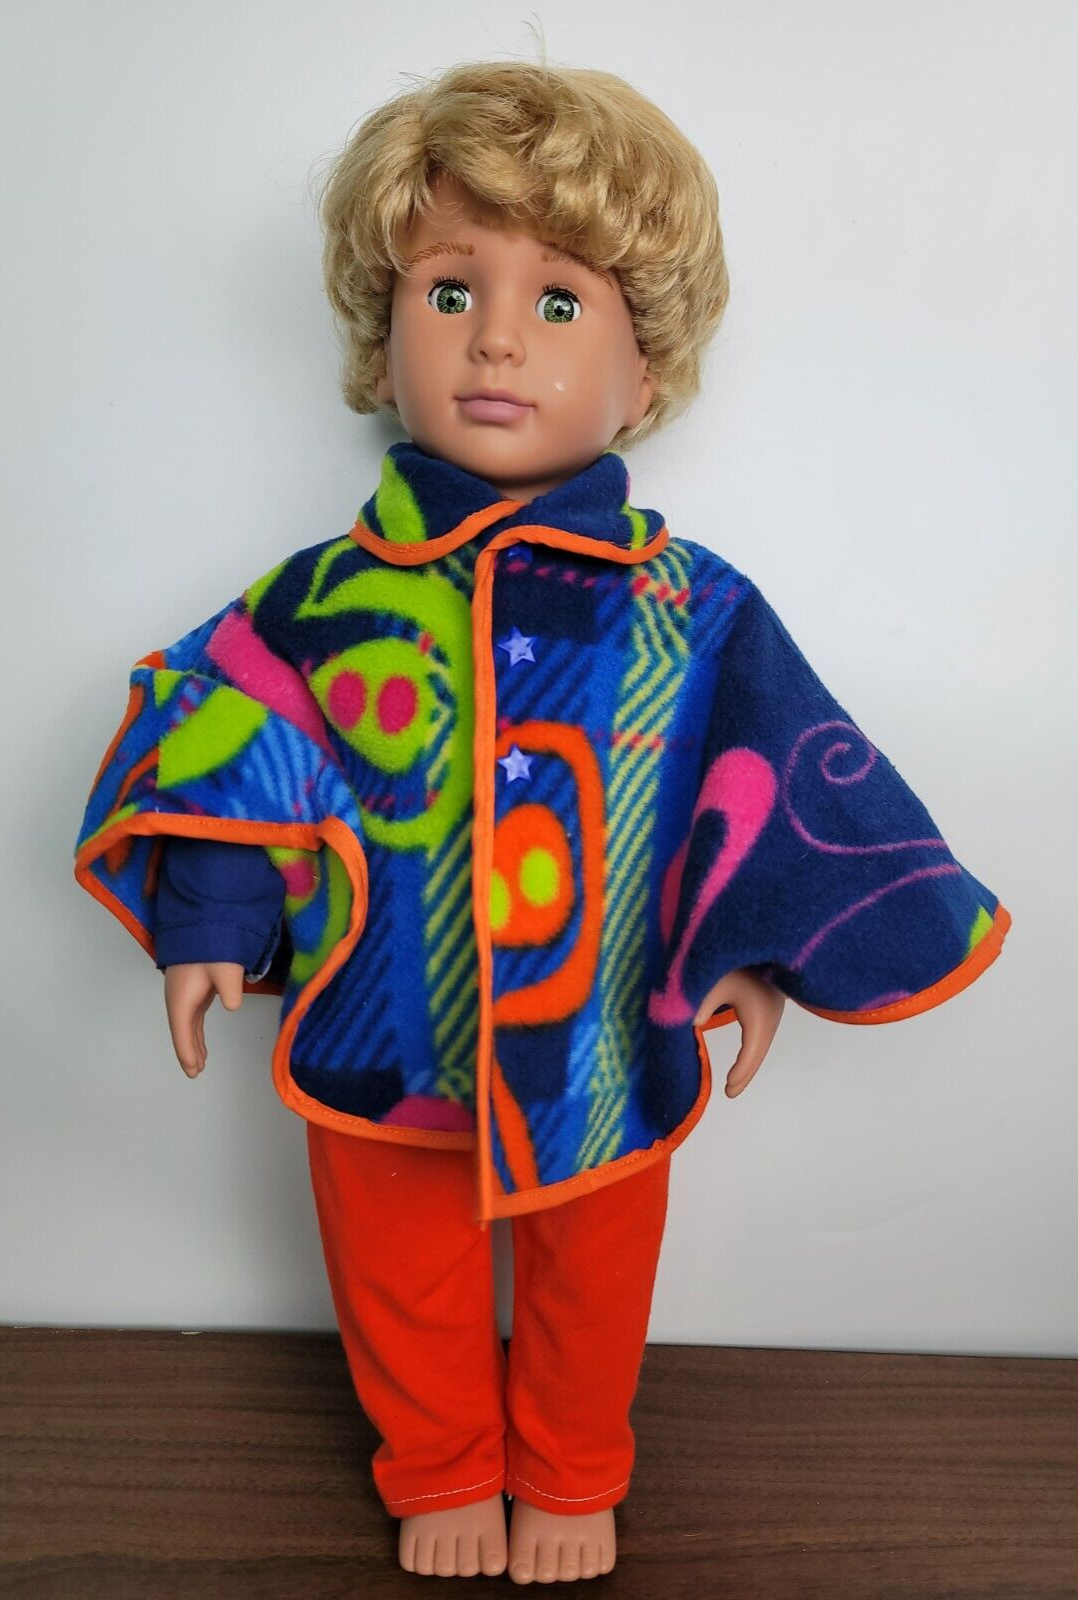 Doll Clothes Fleece Poncho Pants Boy Outfit Shirt Jacket fits American Girl 18" - $17.80